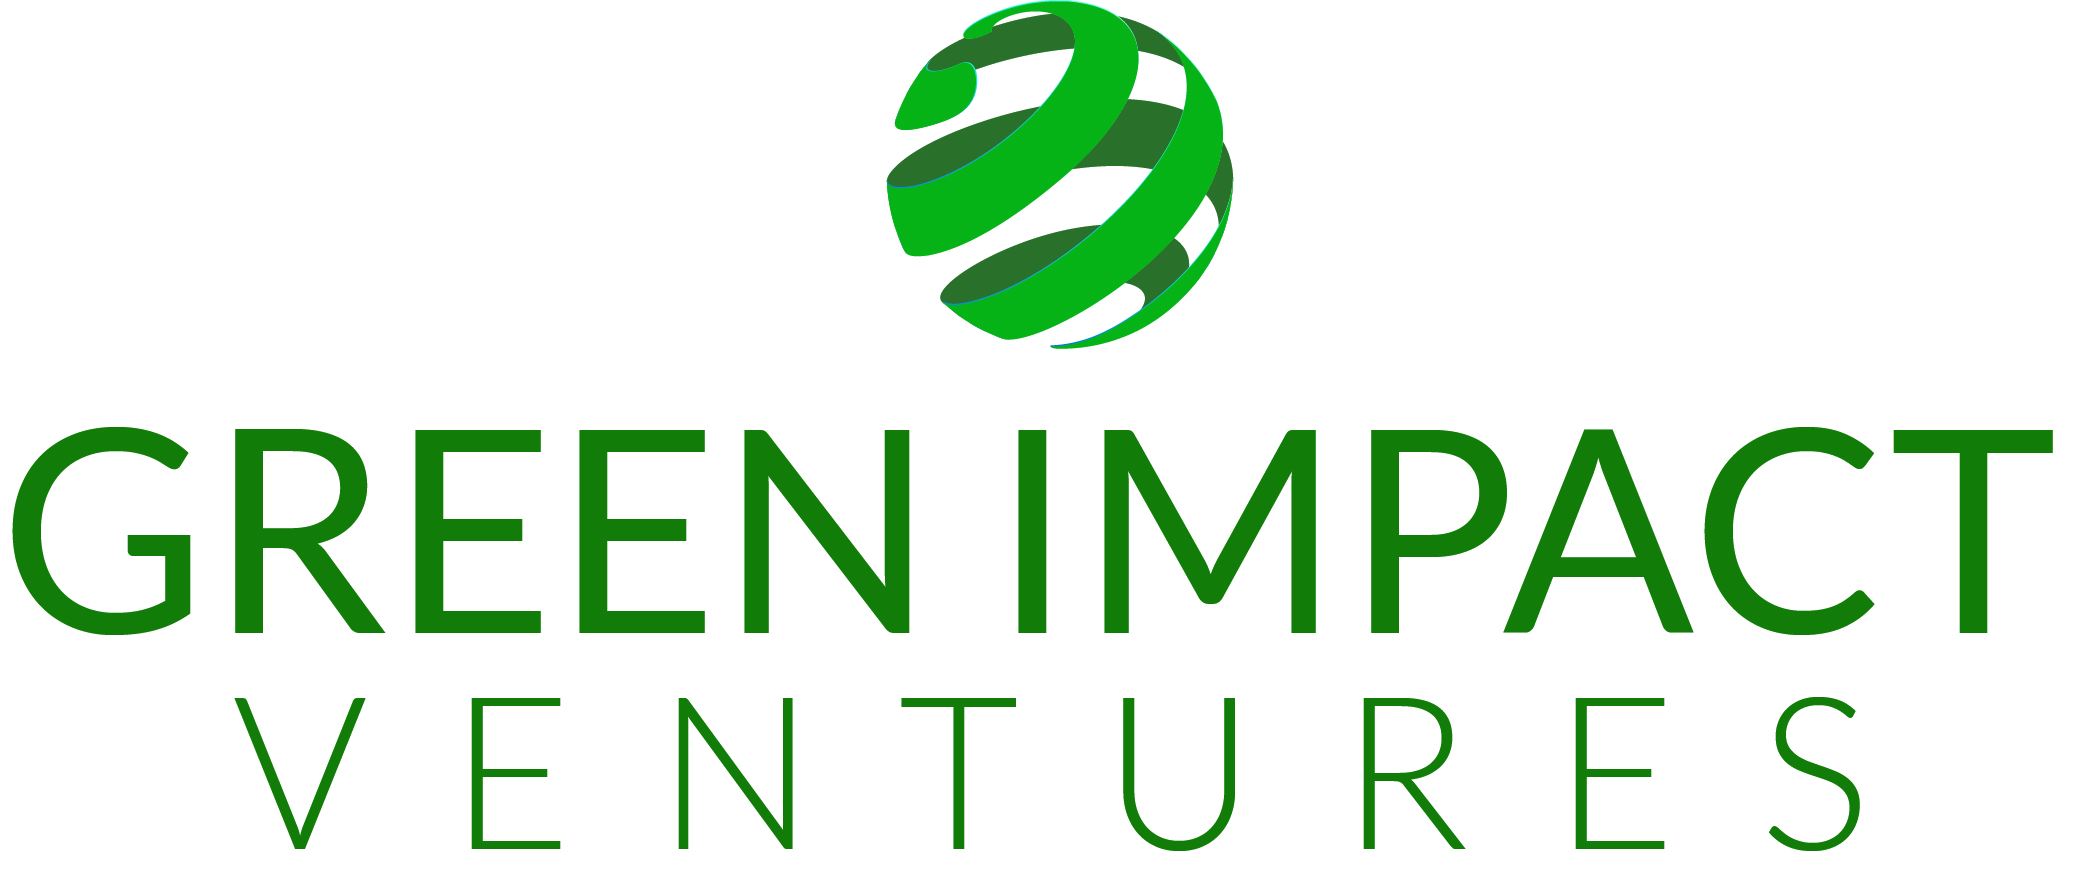 Green Impact Ventures A/S – suspends announced expectations - GlobeNewswire